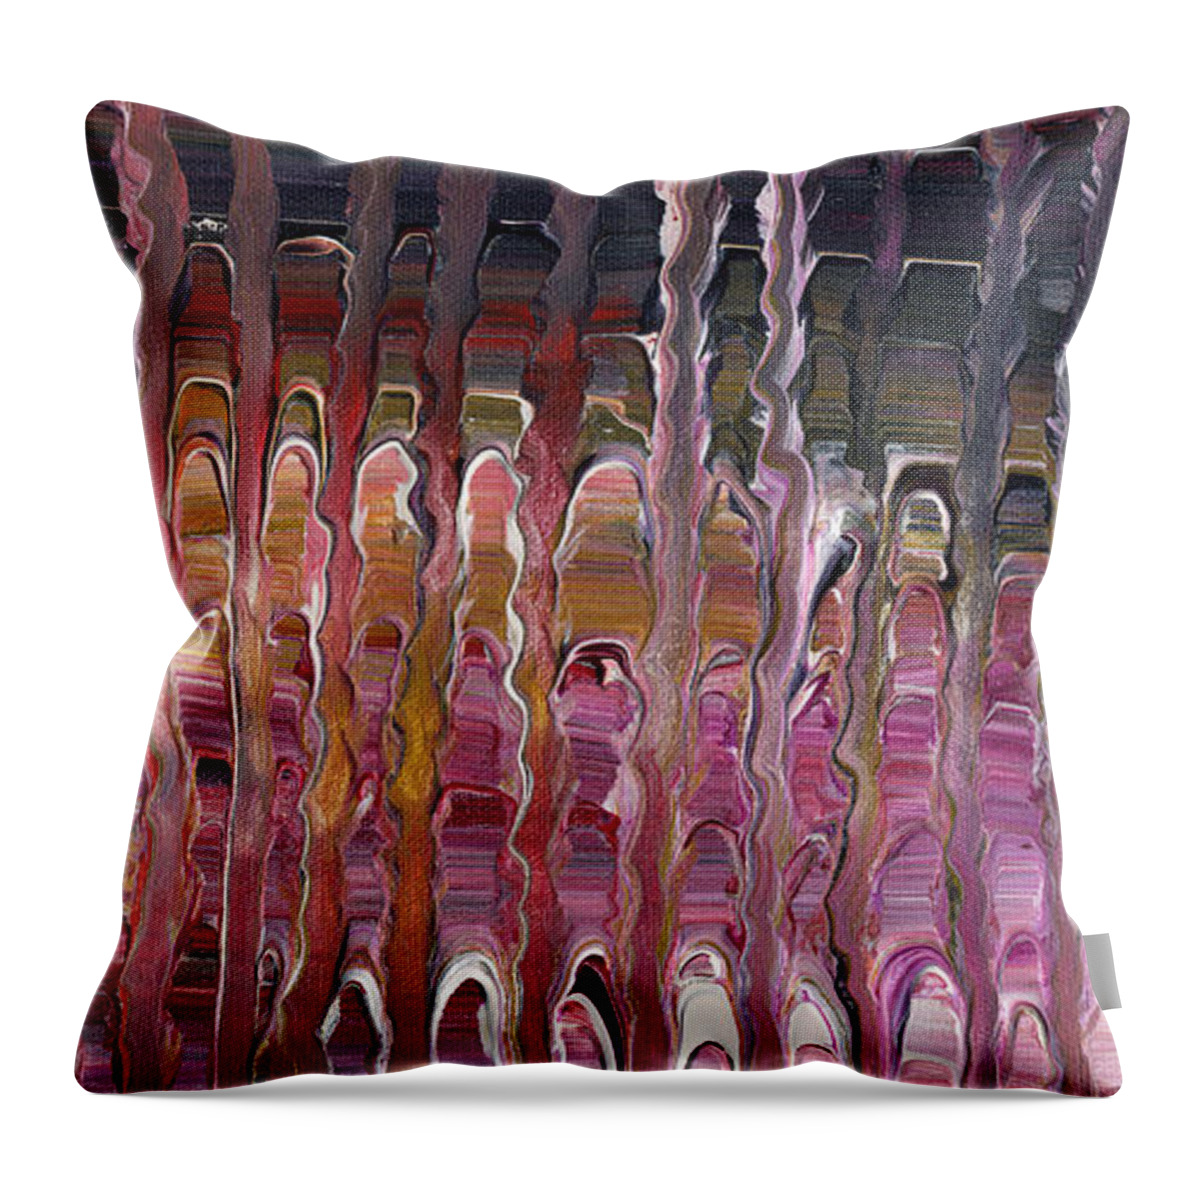 Abstract Throw Pillow featuring the painting Release of Illusion by Julia Stubbe